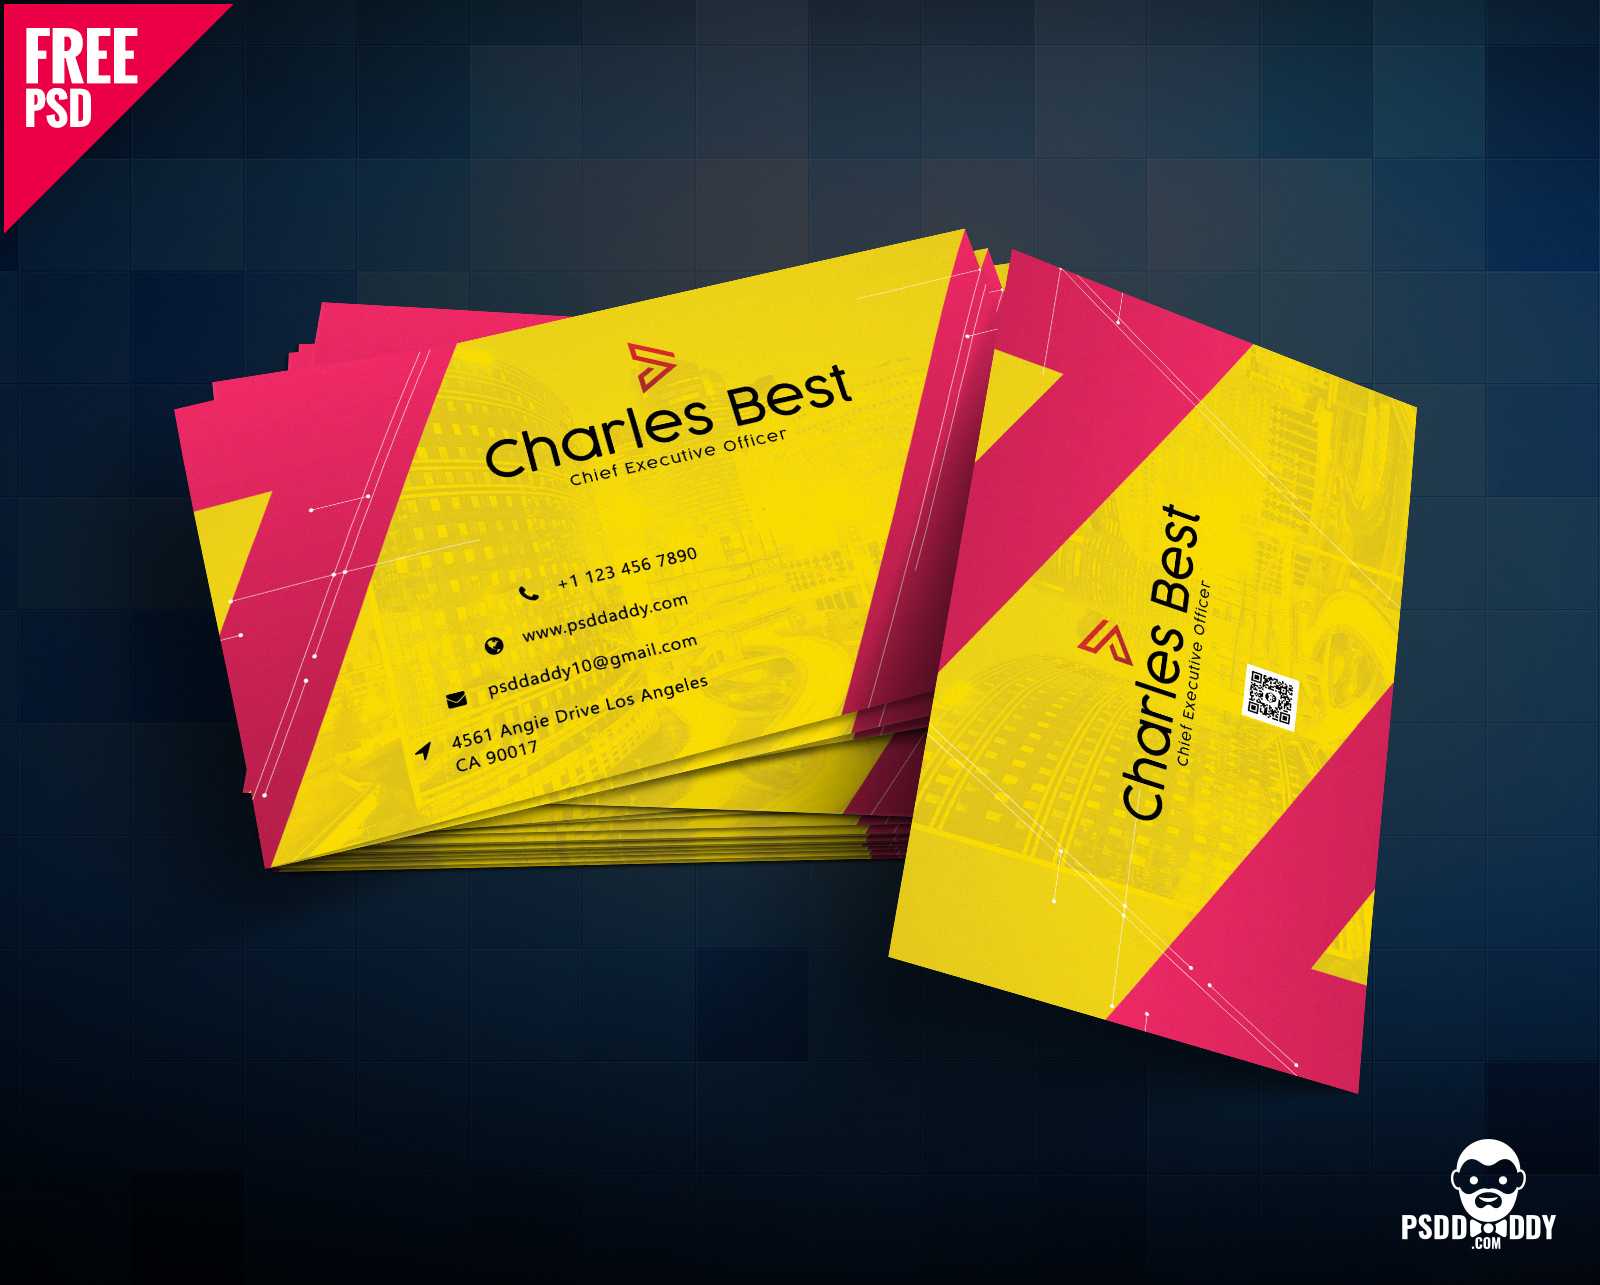 011 Free Business Card Psd Template Cover Staggering Ideas With Construction Business Card Templates Download Free